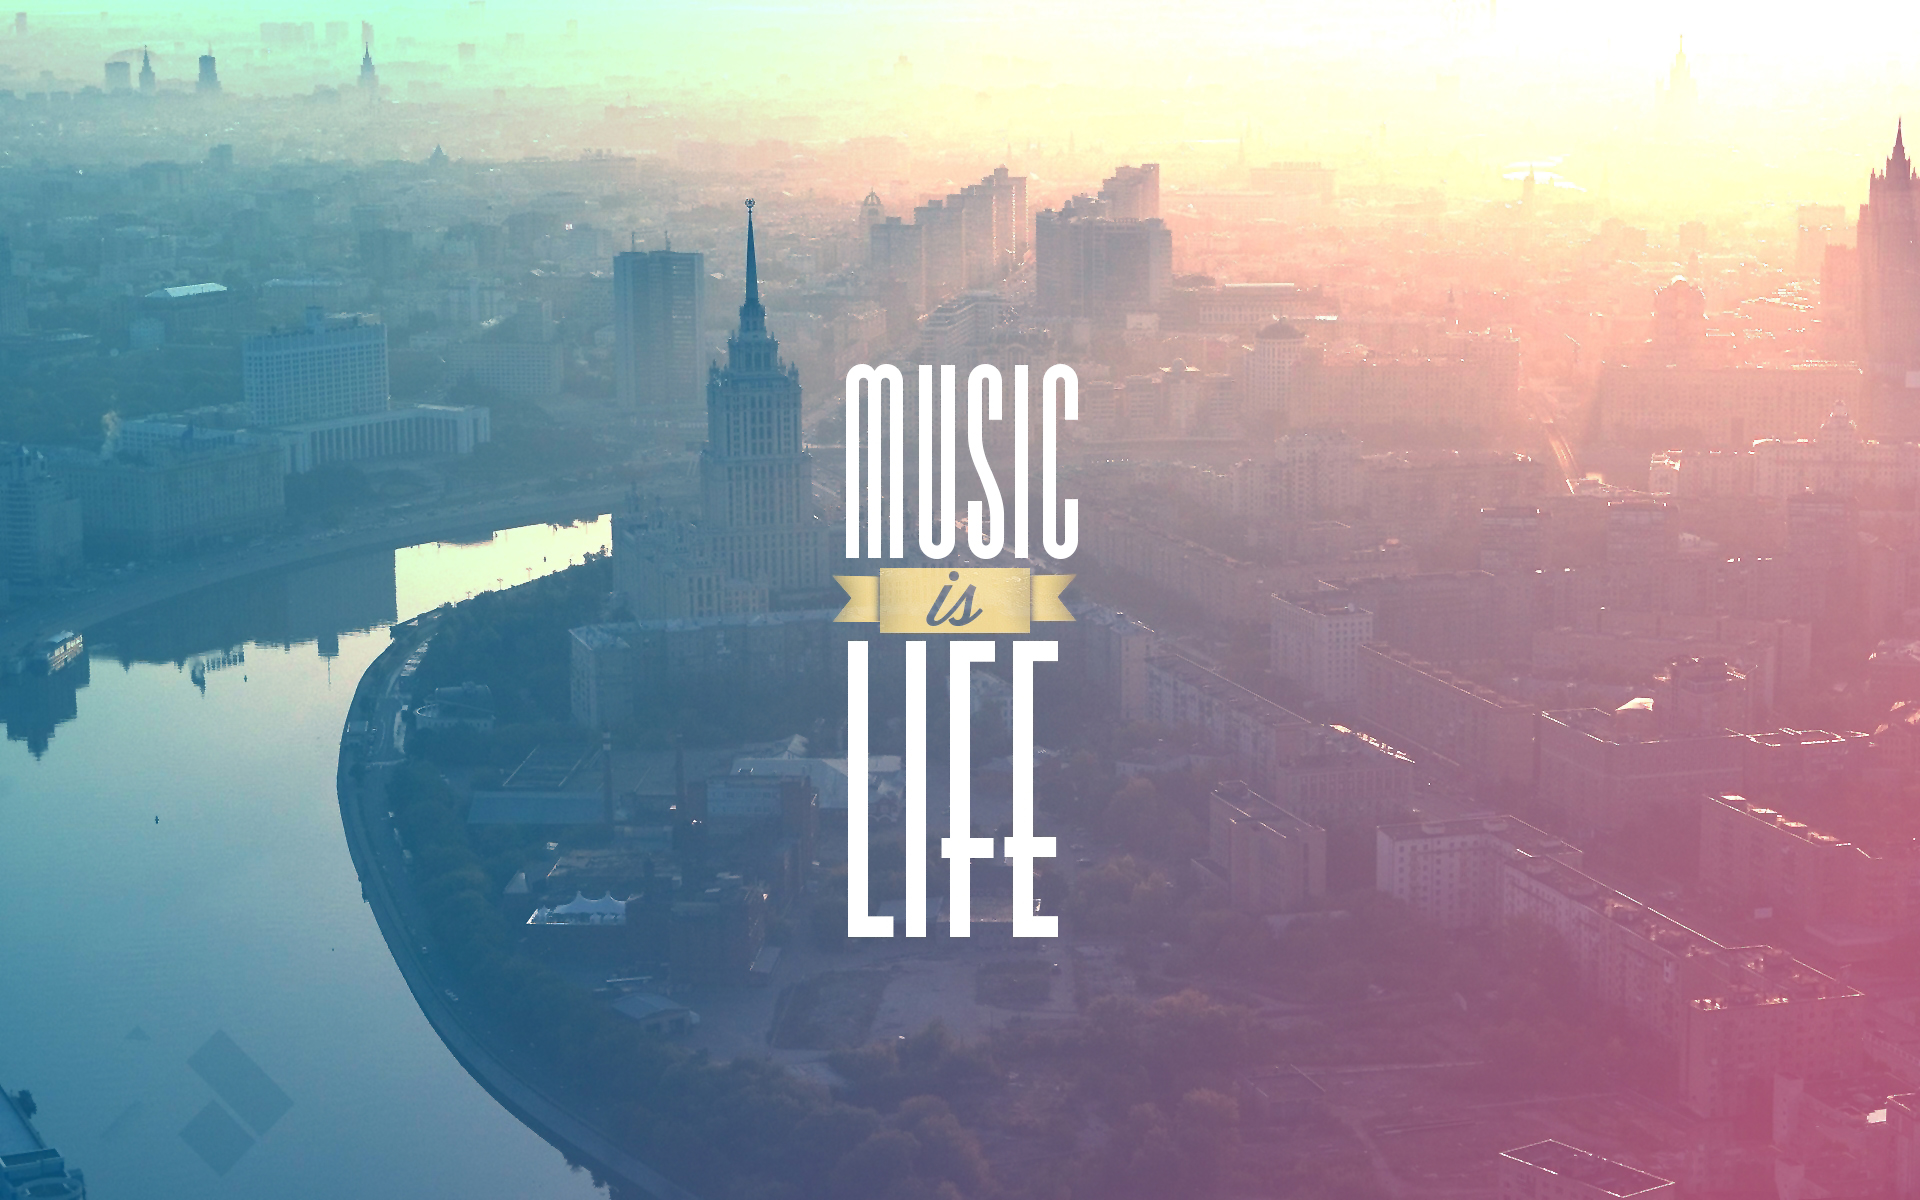 Music Is My Life Wallpapers